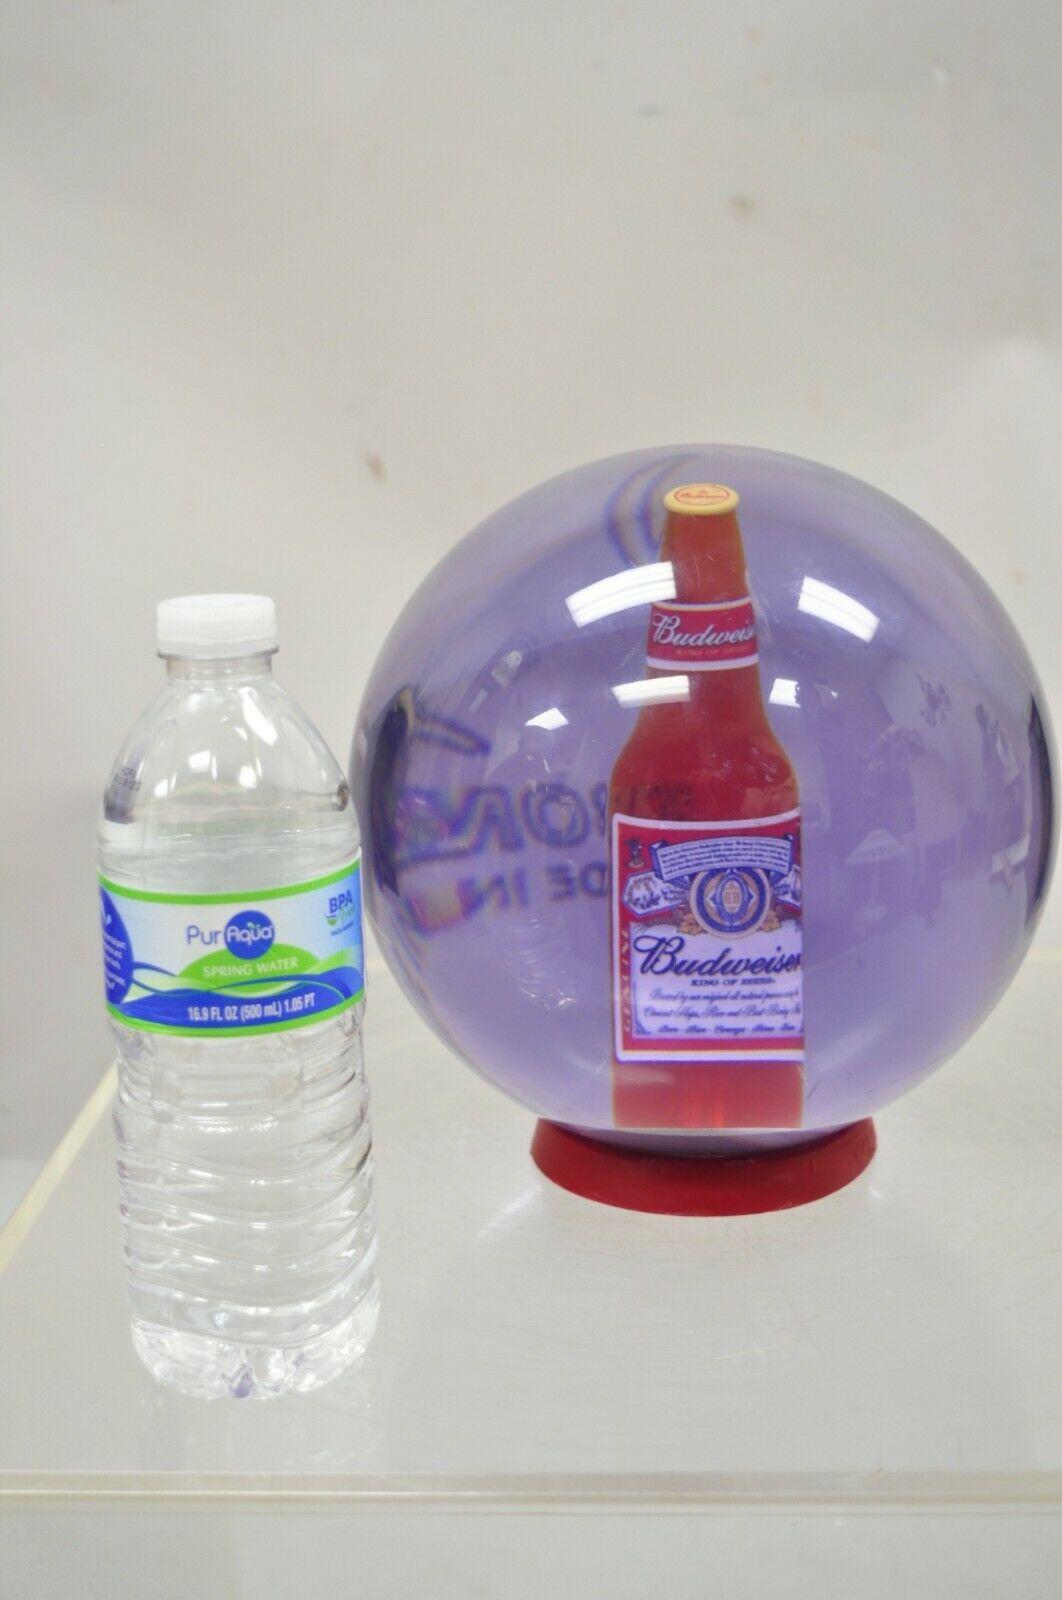 Vintage Ebonite Budweiser Bottle 14lbs Bowling Ball with Stand, New Undrilled 1